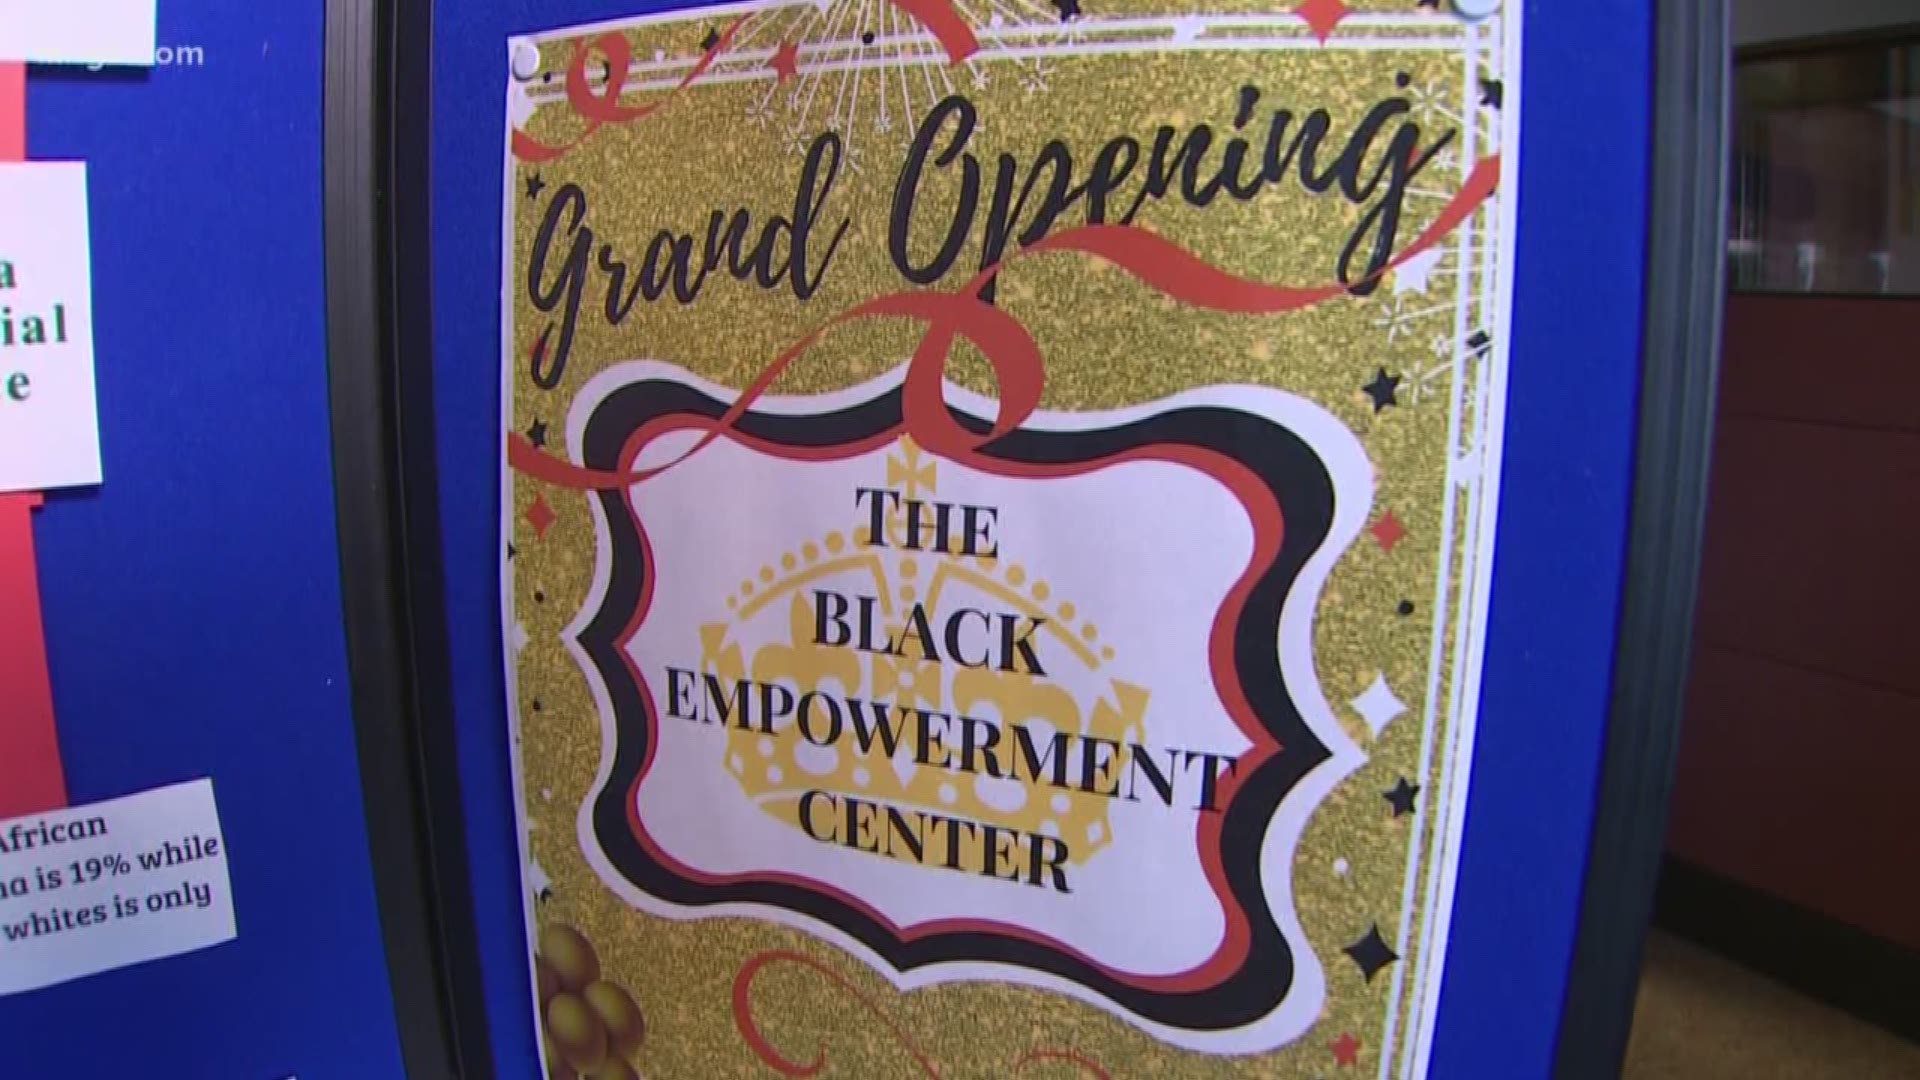 The Tacoma Urban League is trying to close the racial wealth gap in the city. This week they will open the Black Empowerment Center. While it won't be a physical presence, KING 5's Jenna Hanchard tells us about the services that will be offered.